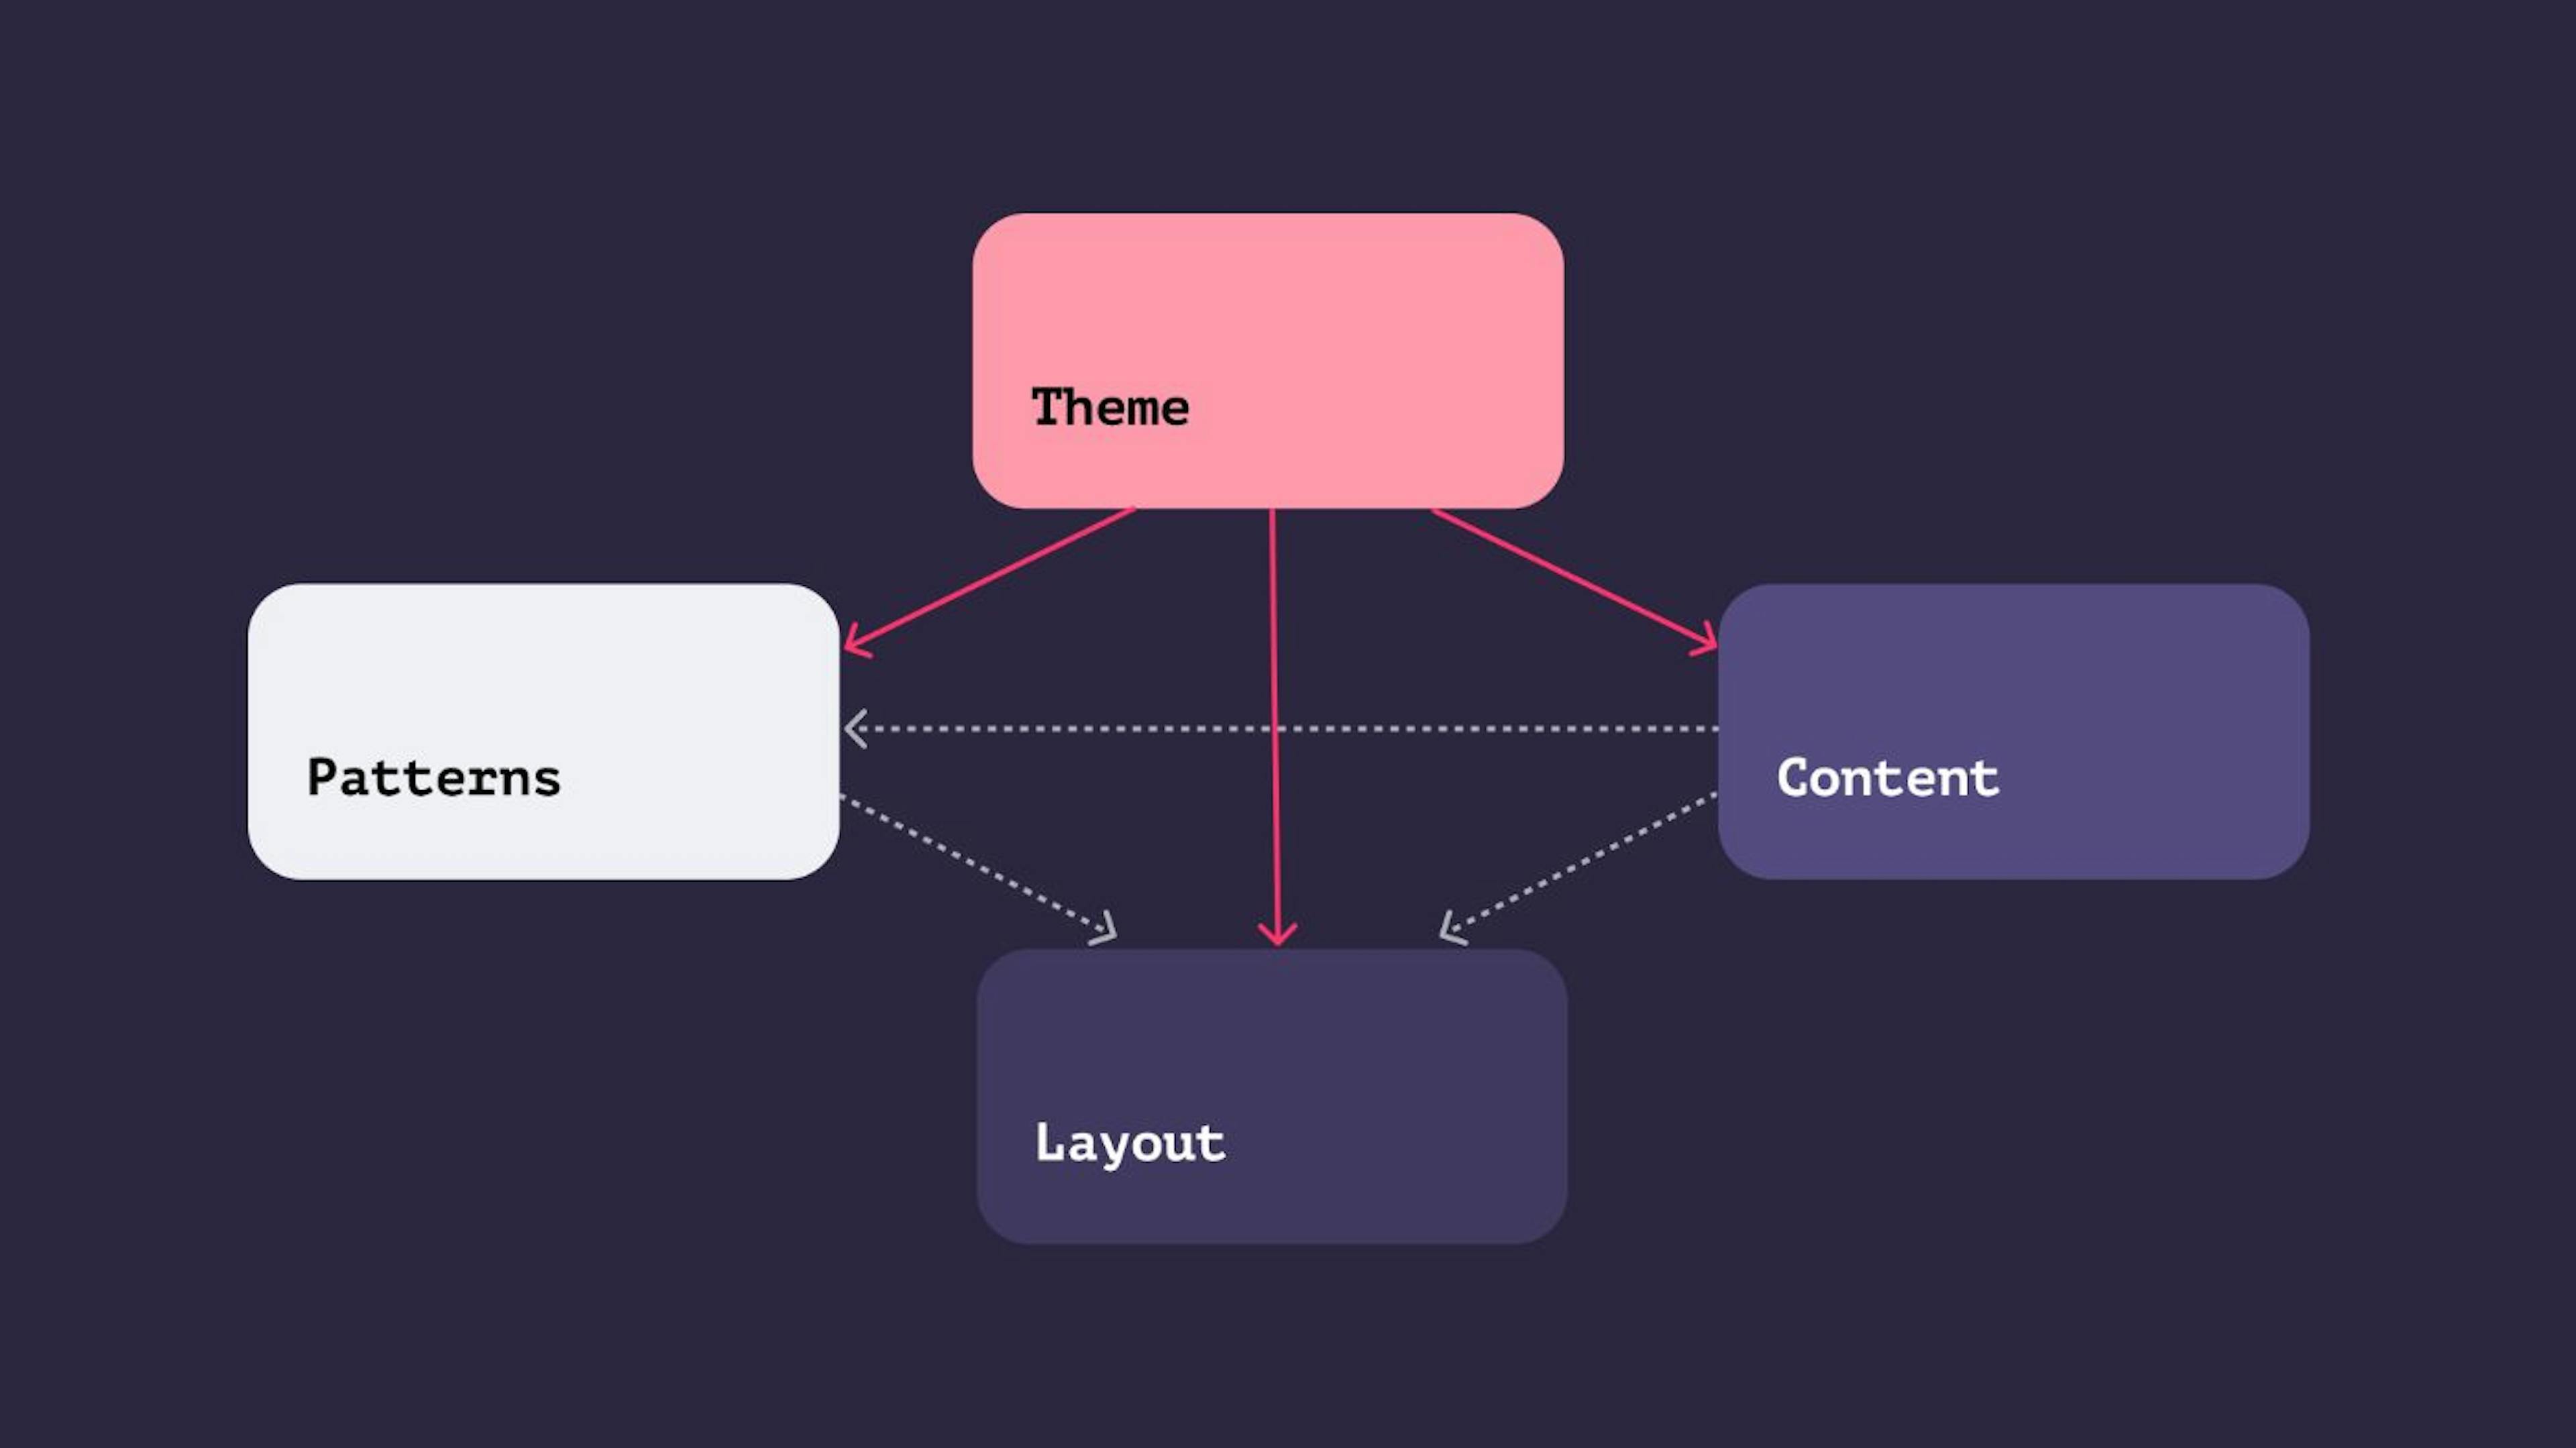 4 levels of a design system